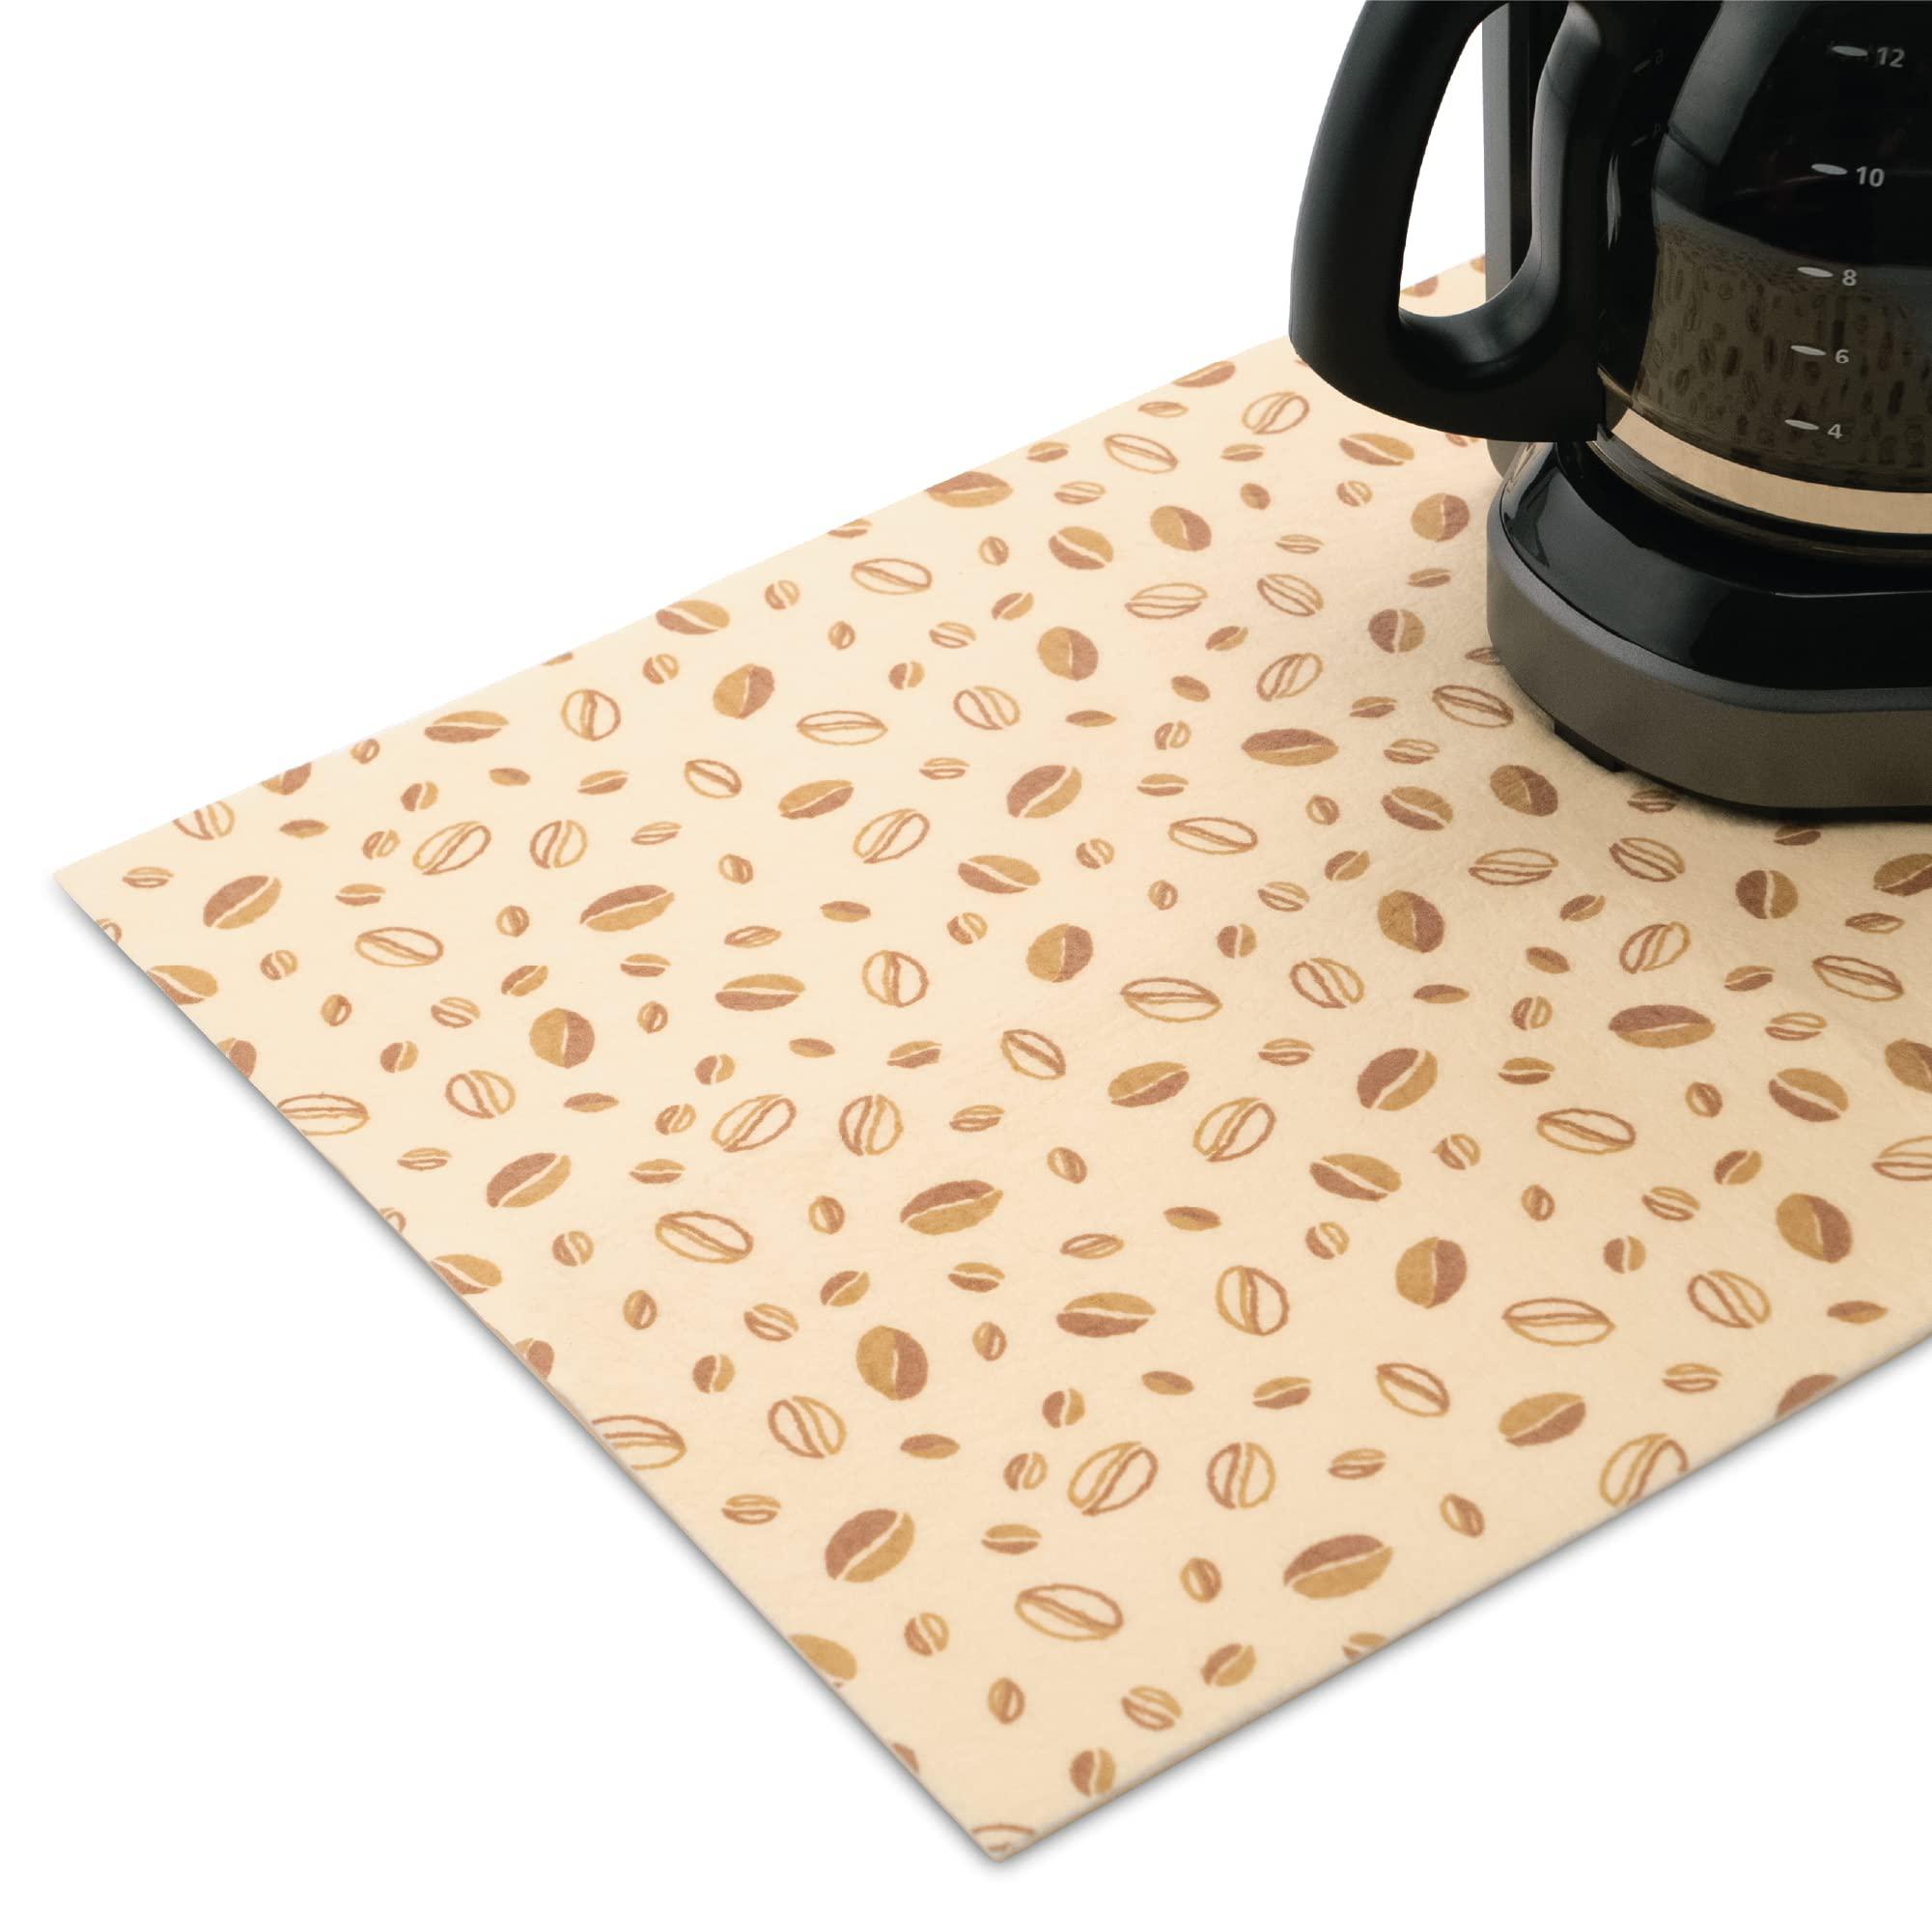 s&t inc. coffee mat, absorbent coffee bar mat for coffee maker and espresso machine, coffee maker mat for countertops, coffee